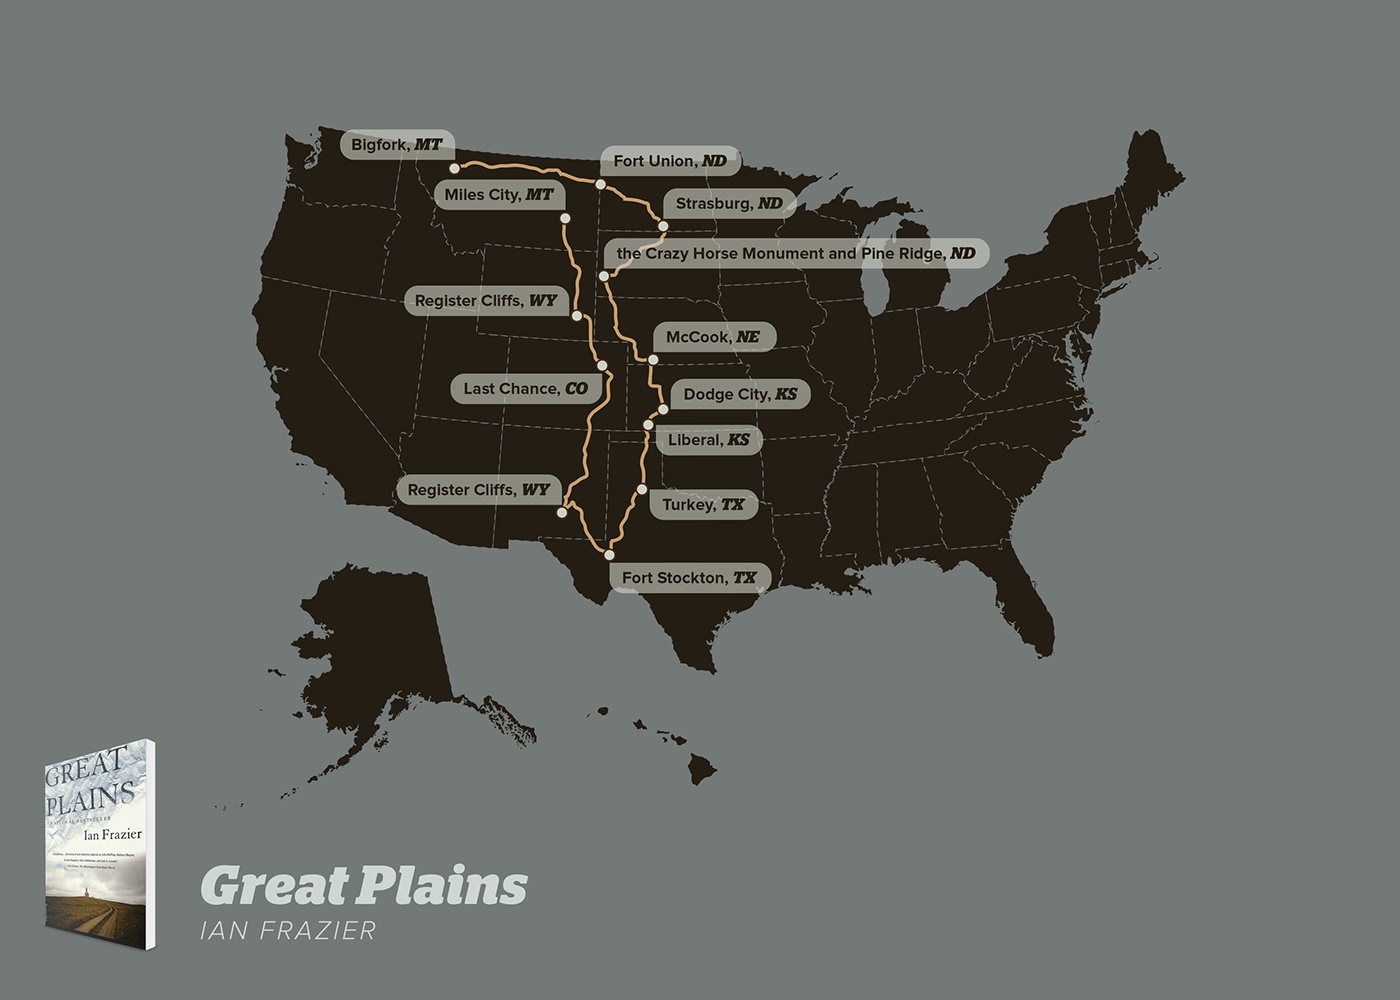 Vector map of the journey taken place in a book by Ian Frazier called "Great Plains"